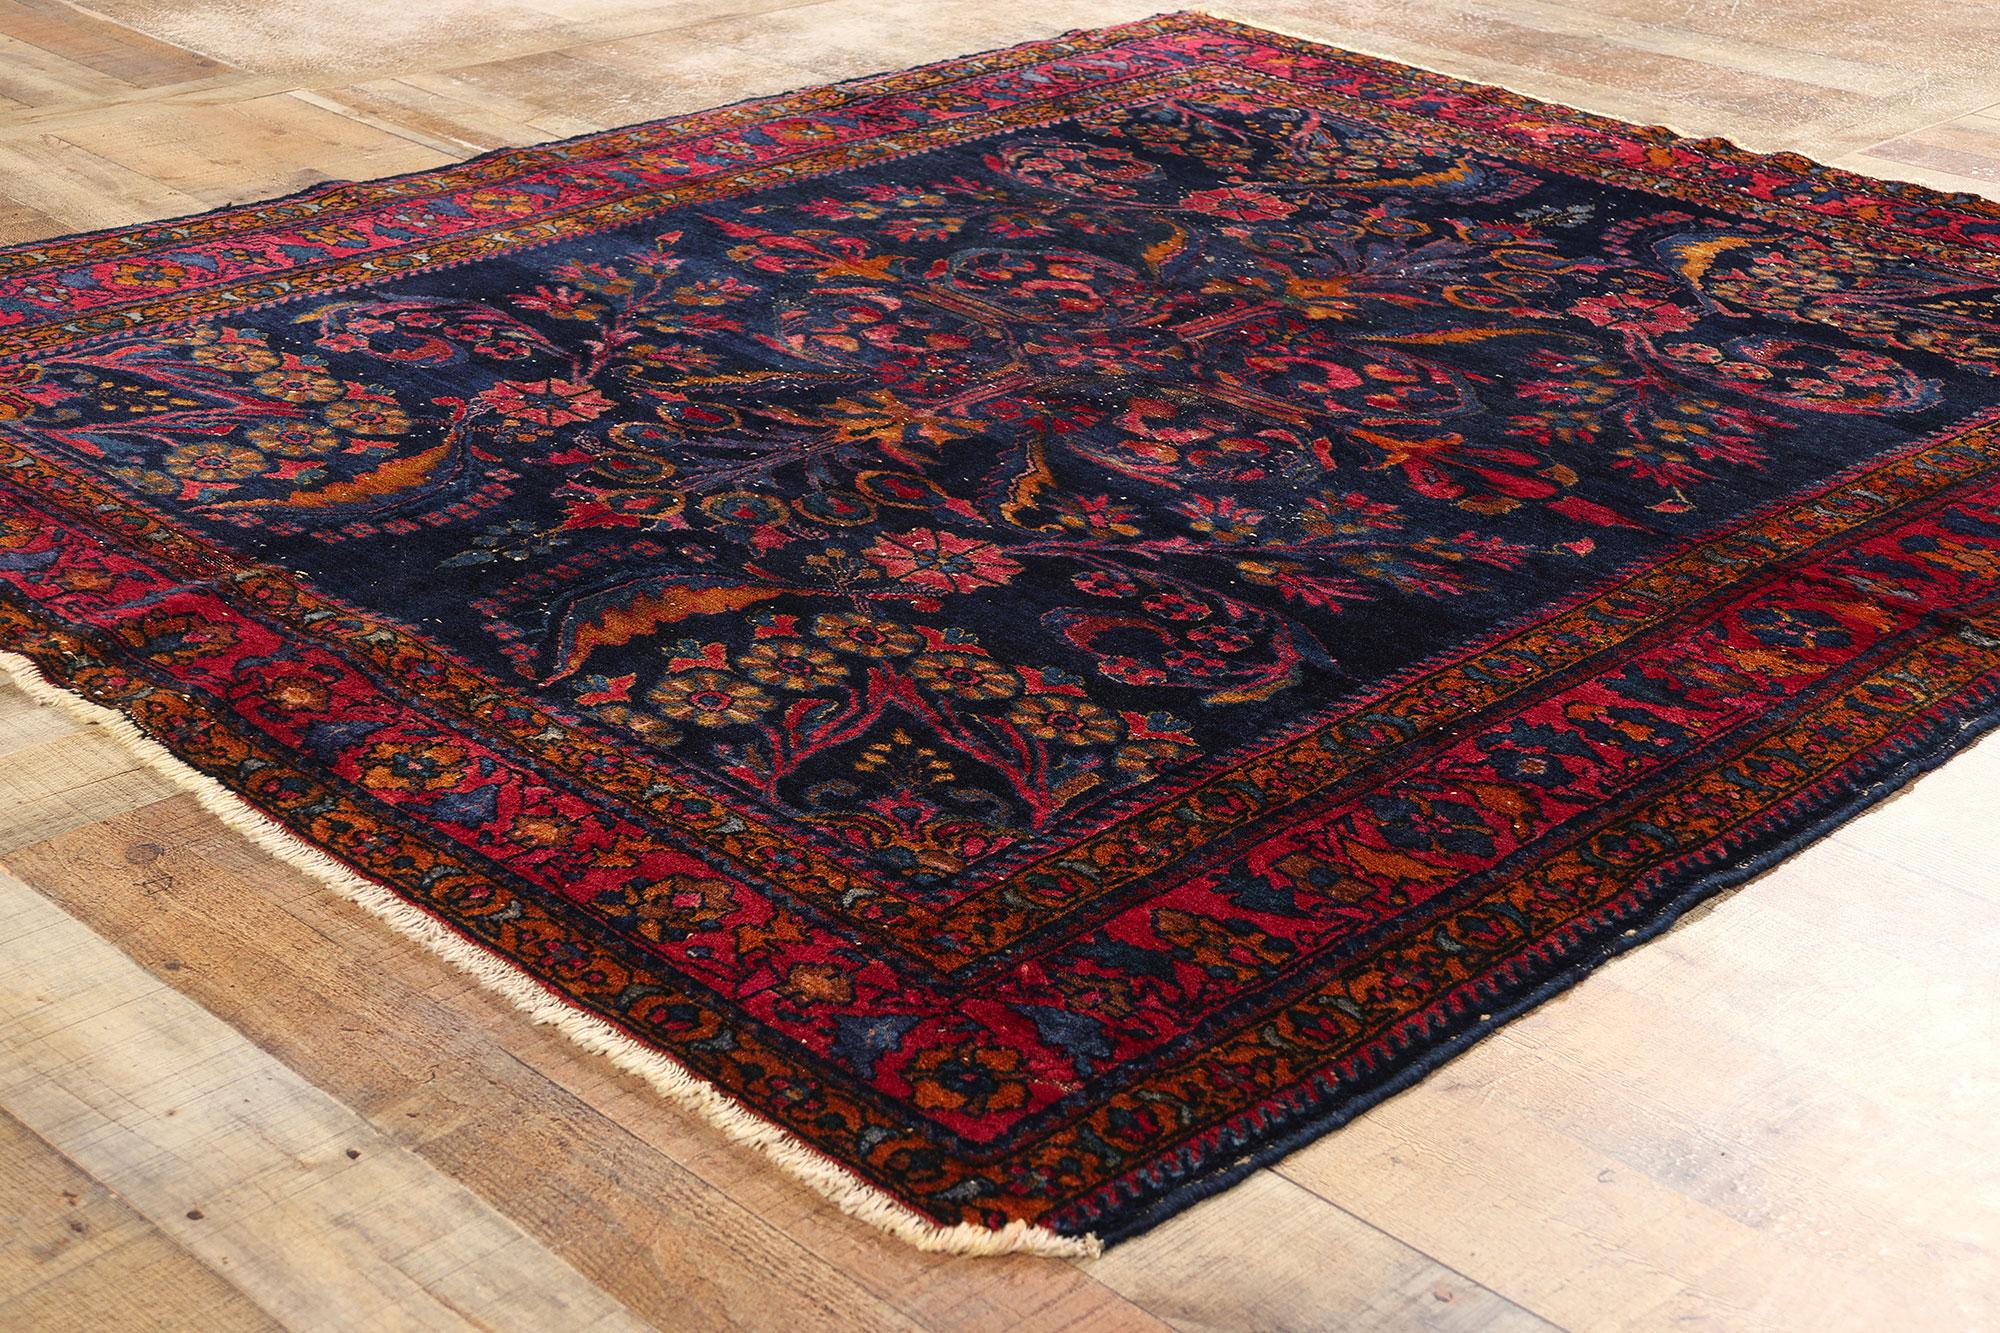 Wool Antique Persian Lilihan Rug with Old World Victorian Renaissance Style For Sale